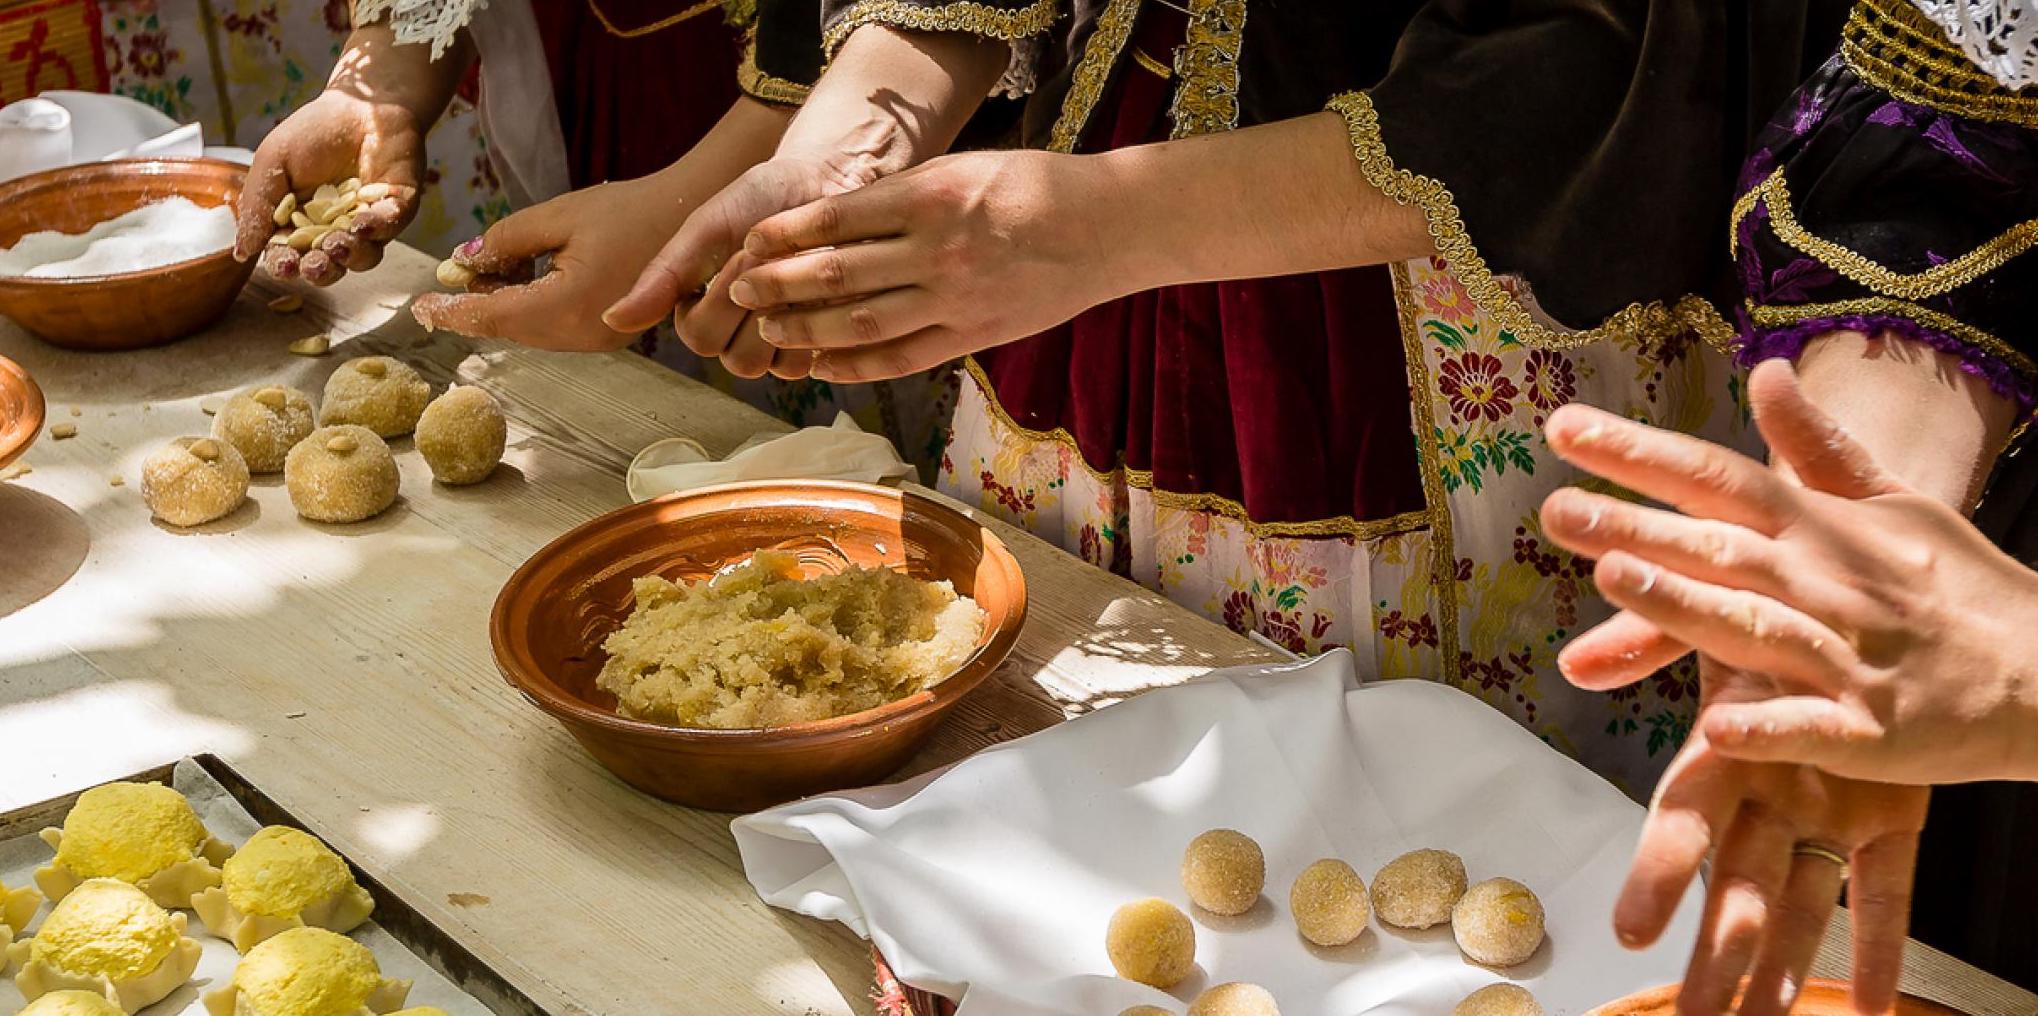 Sardinian Cuisine In The Middle Ages